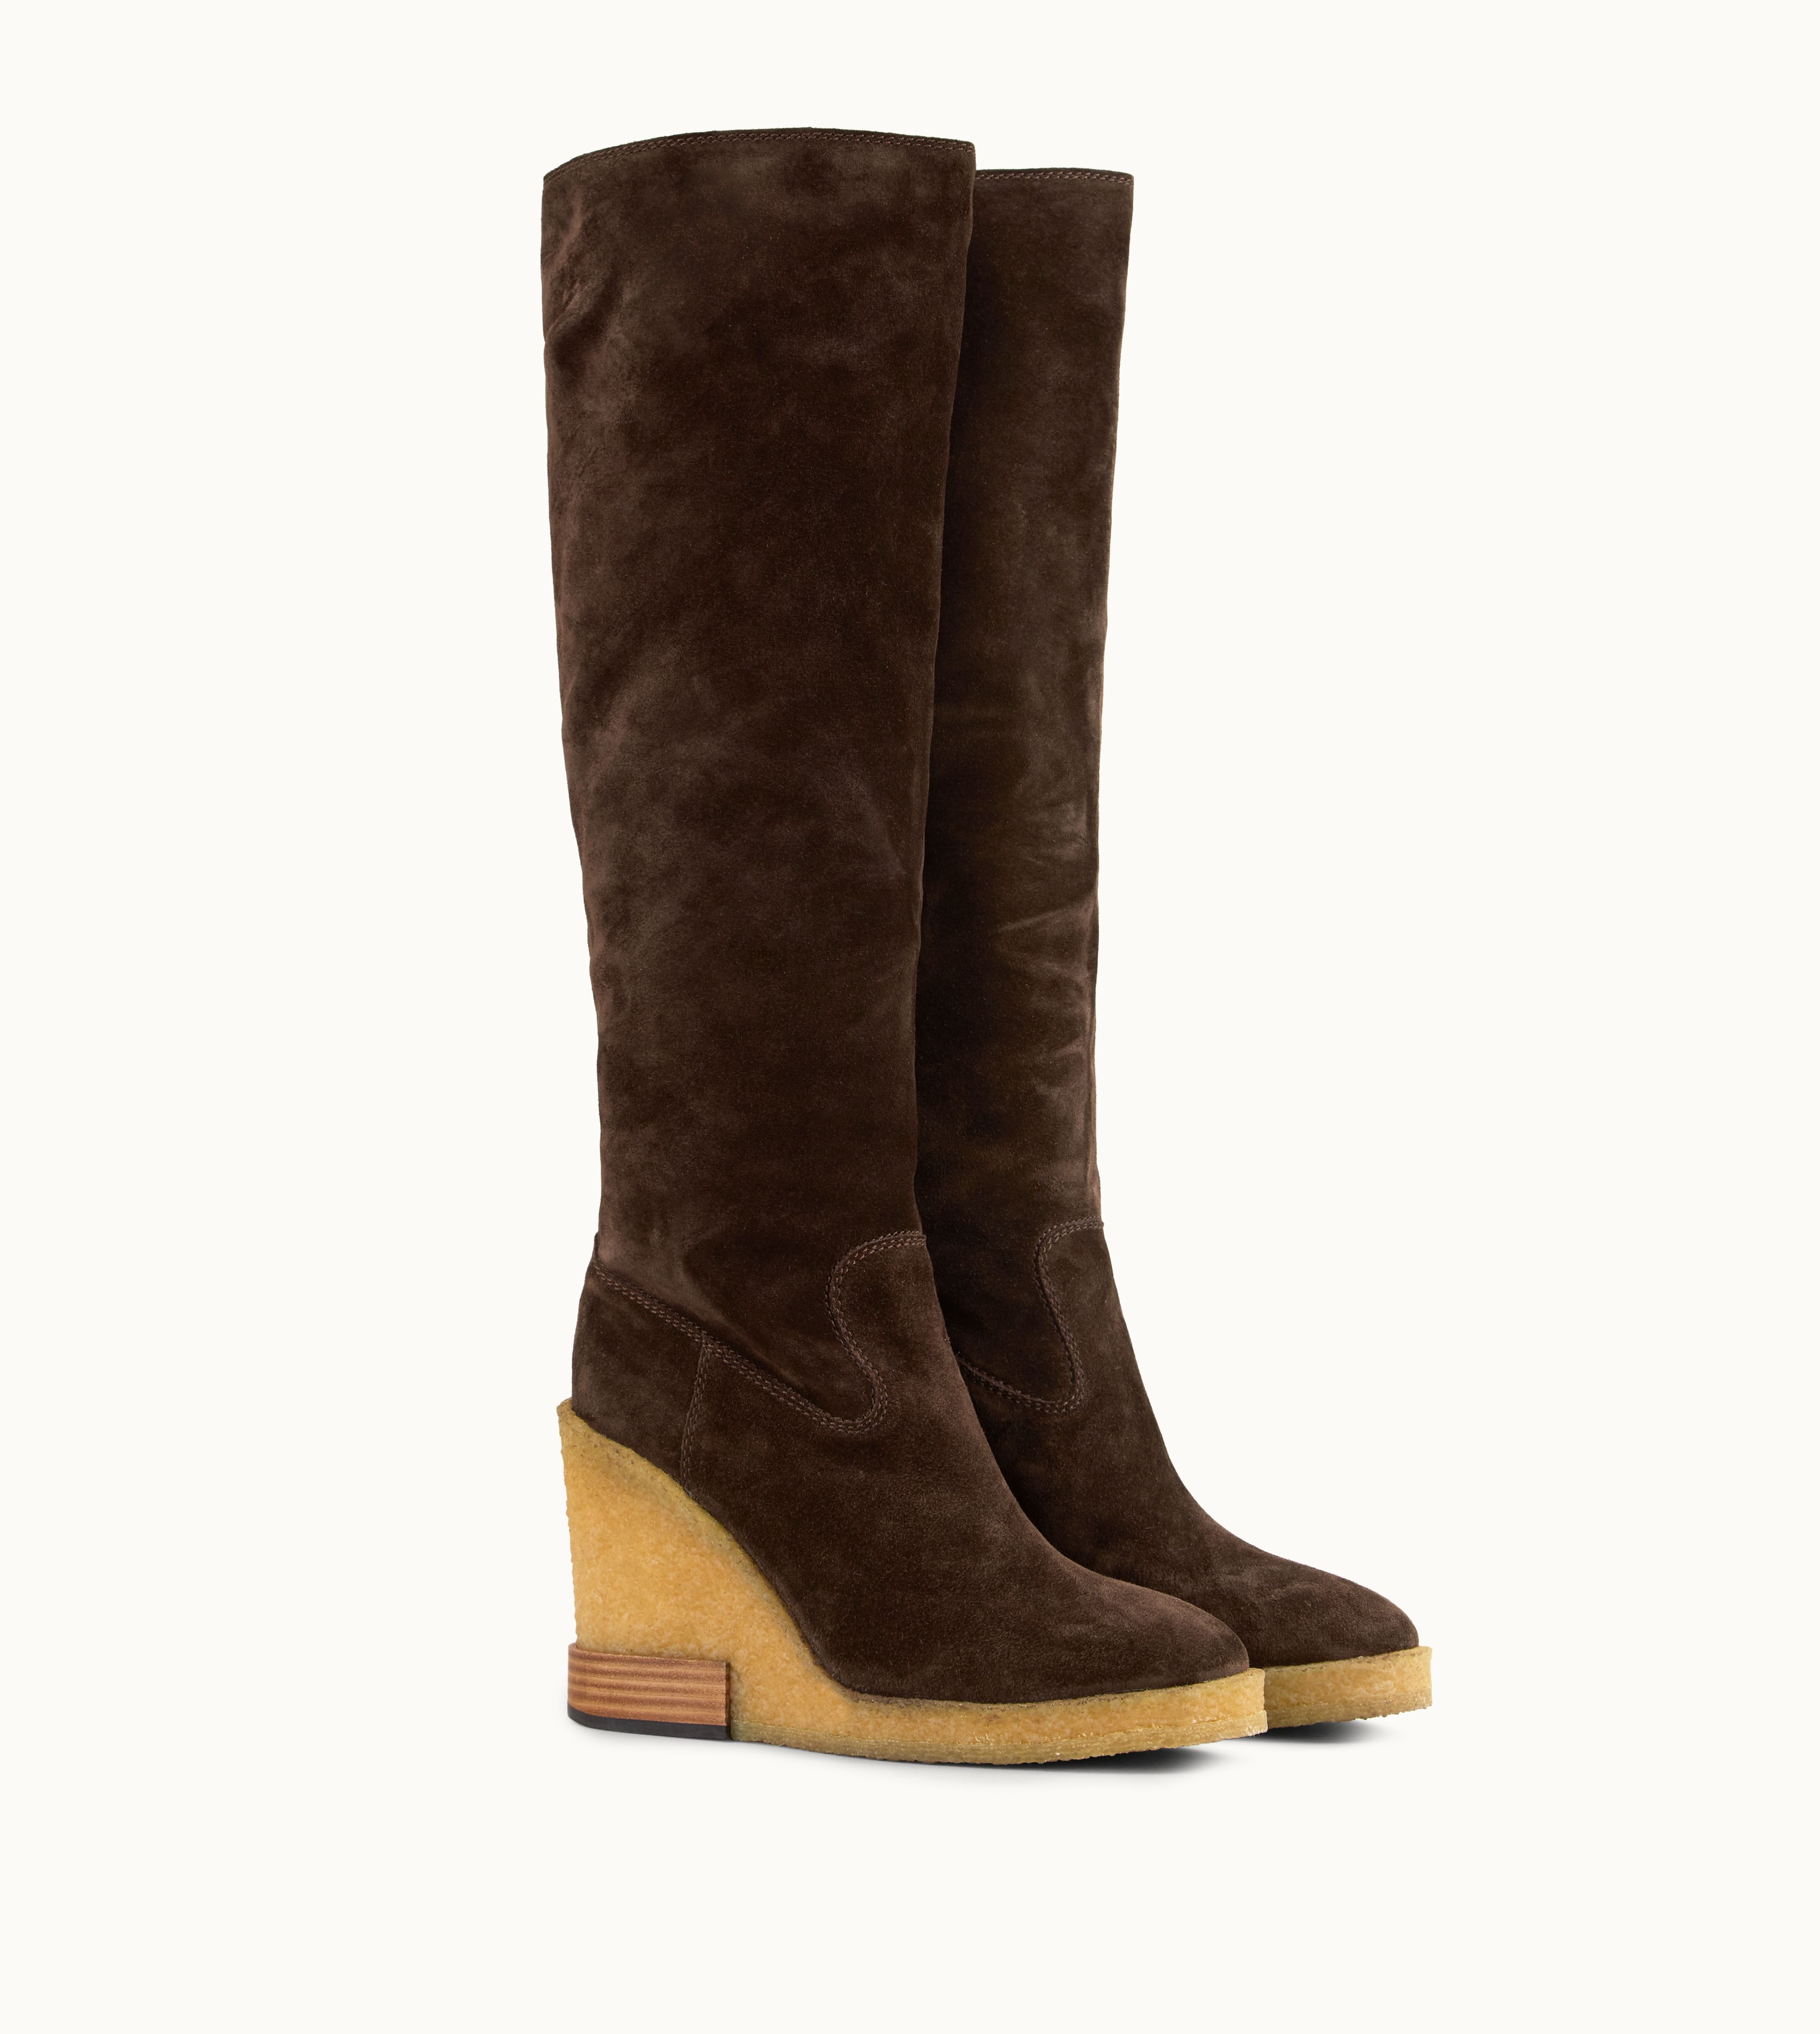 Footwear, Boot, Shoe, Brown, Knee-high boot, Suede, Durango boot, Beige, Leather, Riding boot, 